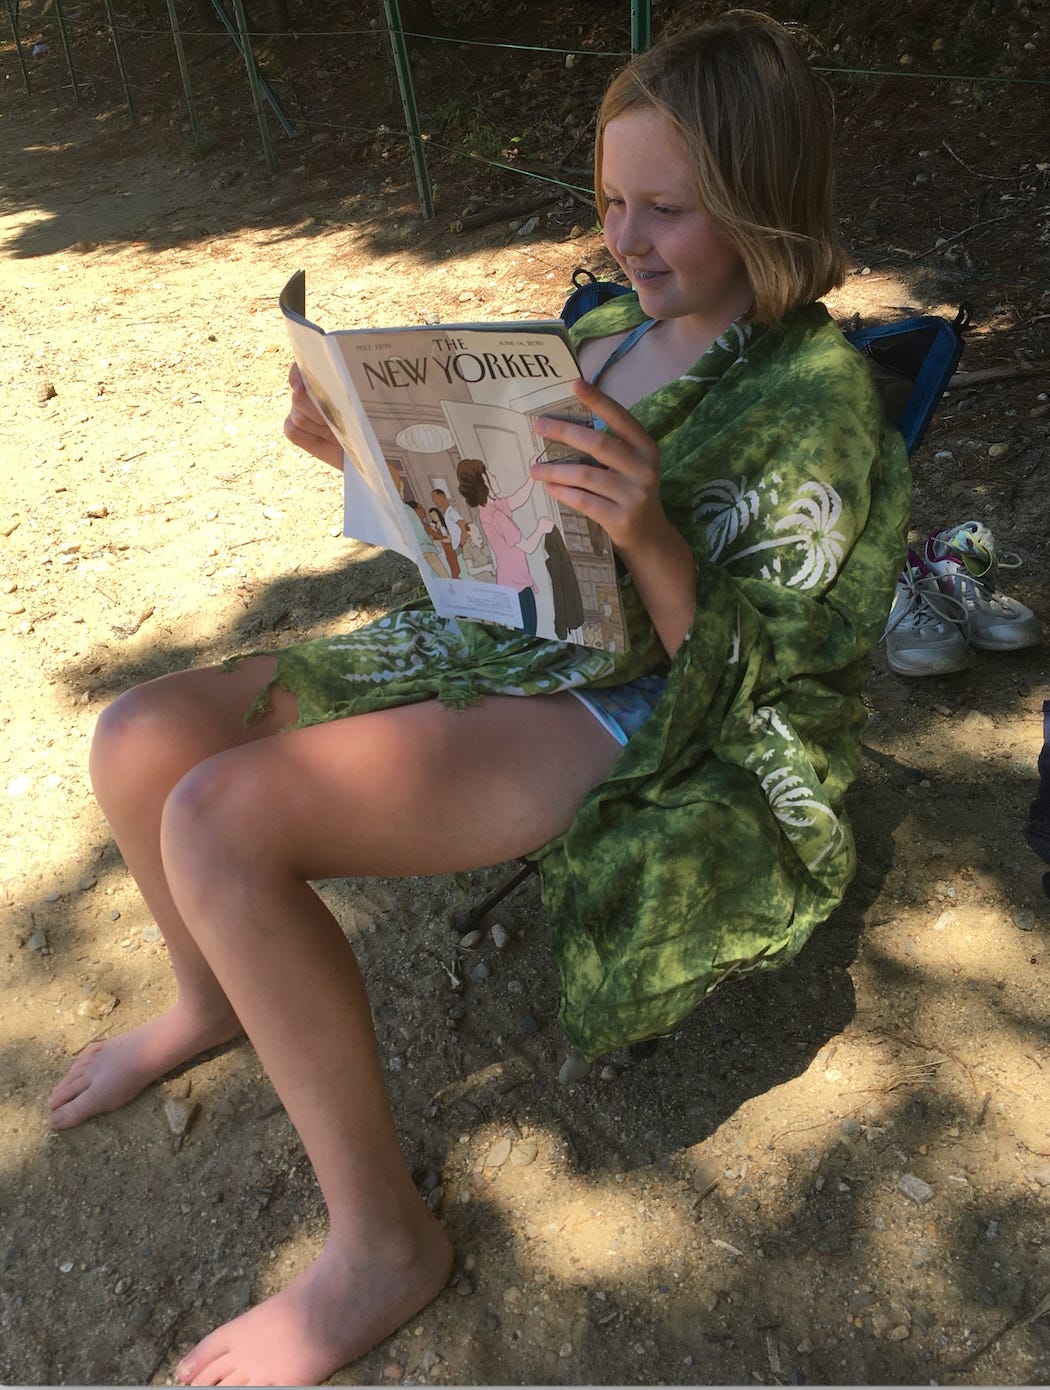 Eleven-year-old reading The New Yorker at Walden Pond